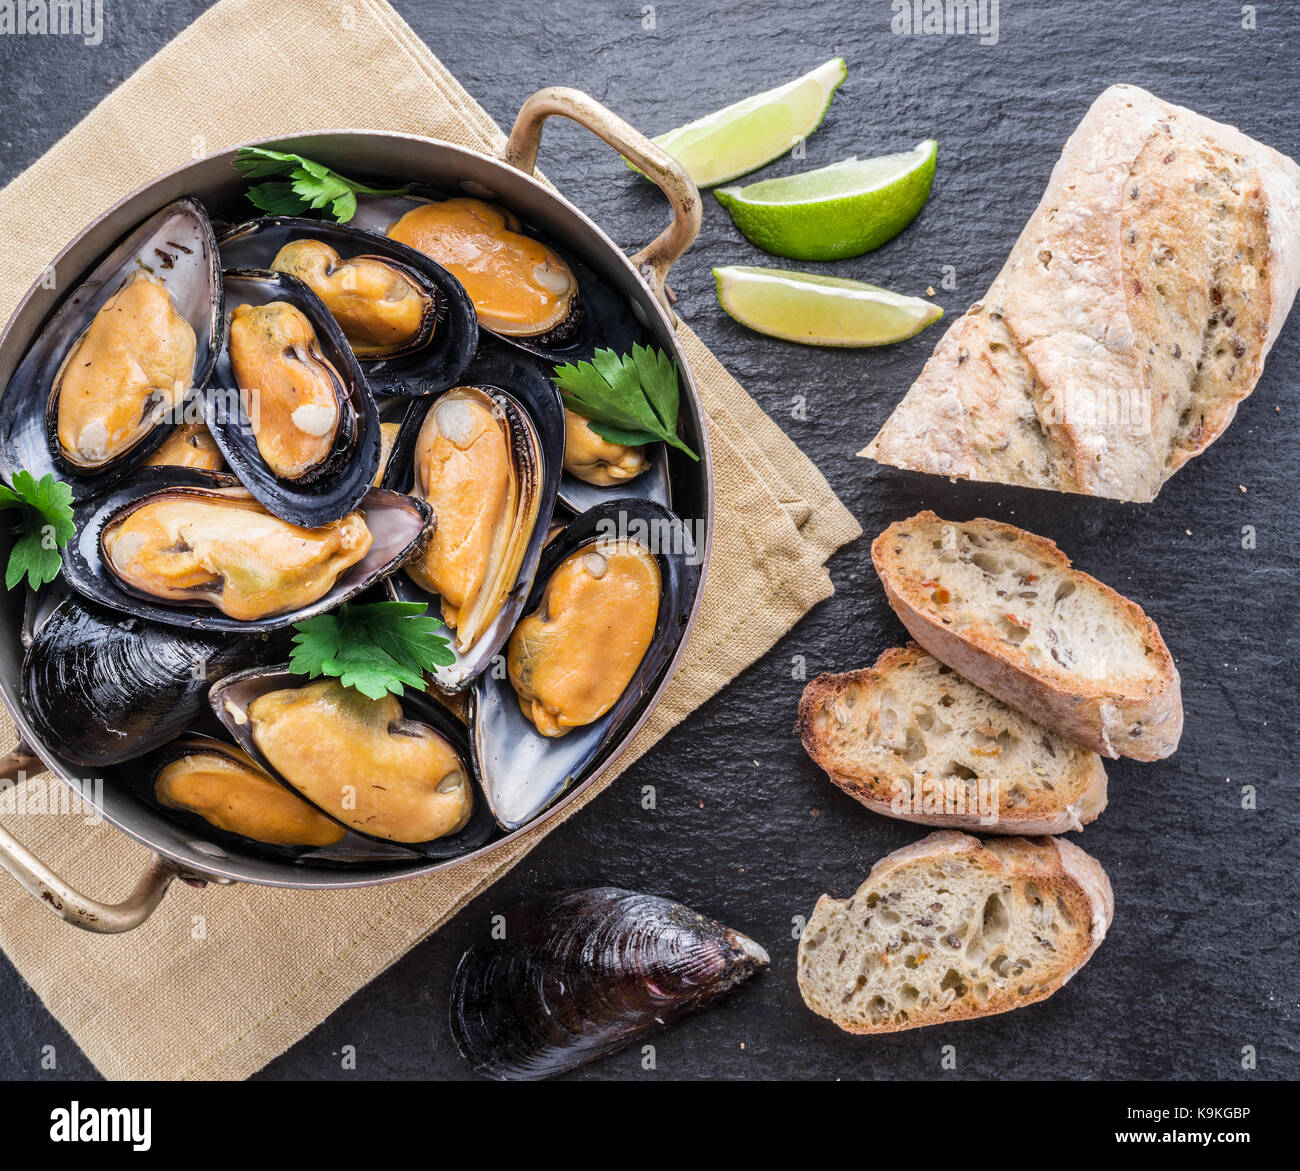 Boiled mussels in copper pan on the graphite background. Stock Photo